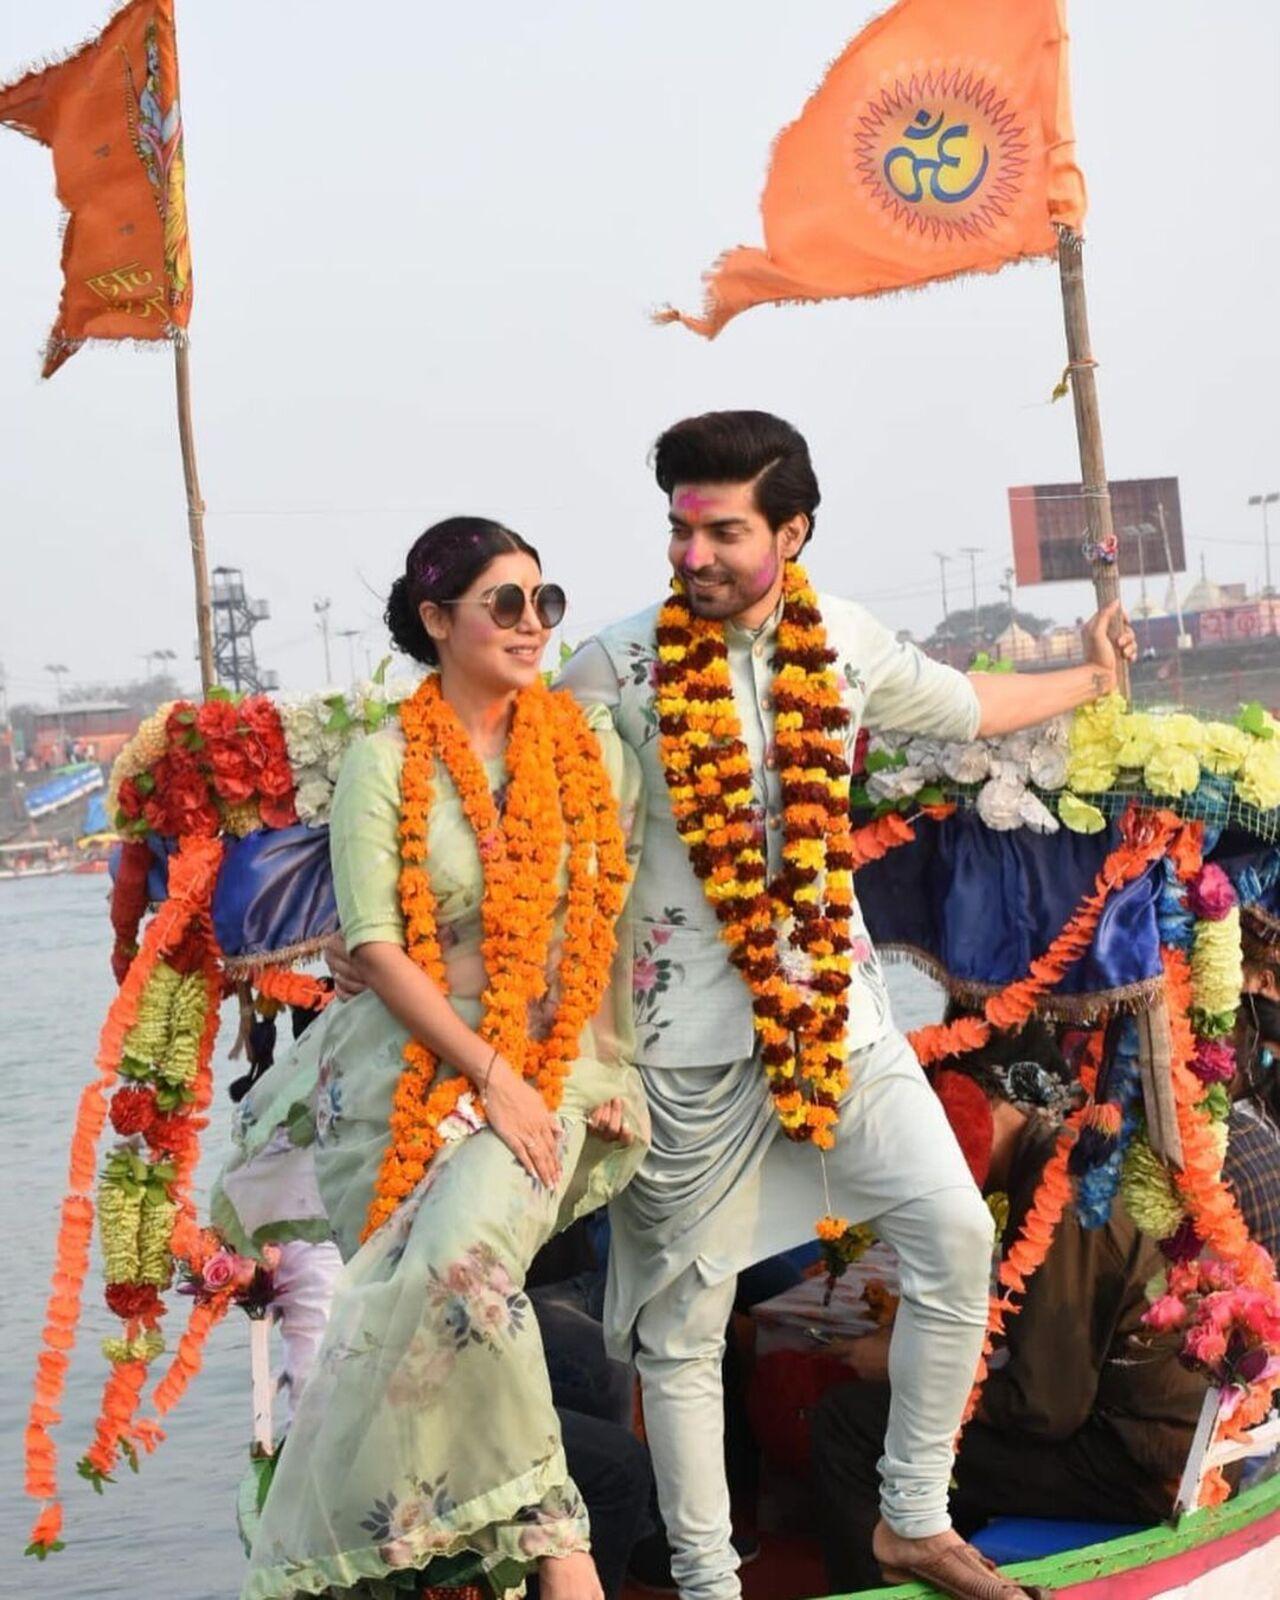 Gurmeet Choudhary and Debina Bonnerjee met during the shoot of their TV show Ramayan where they played the role Lord Ram and Sita respectively